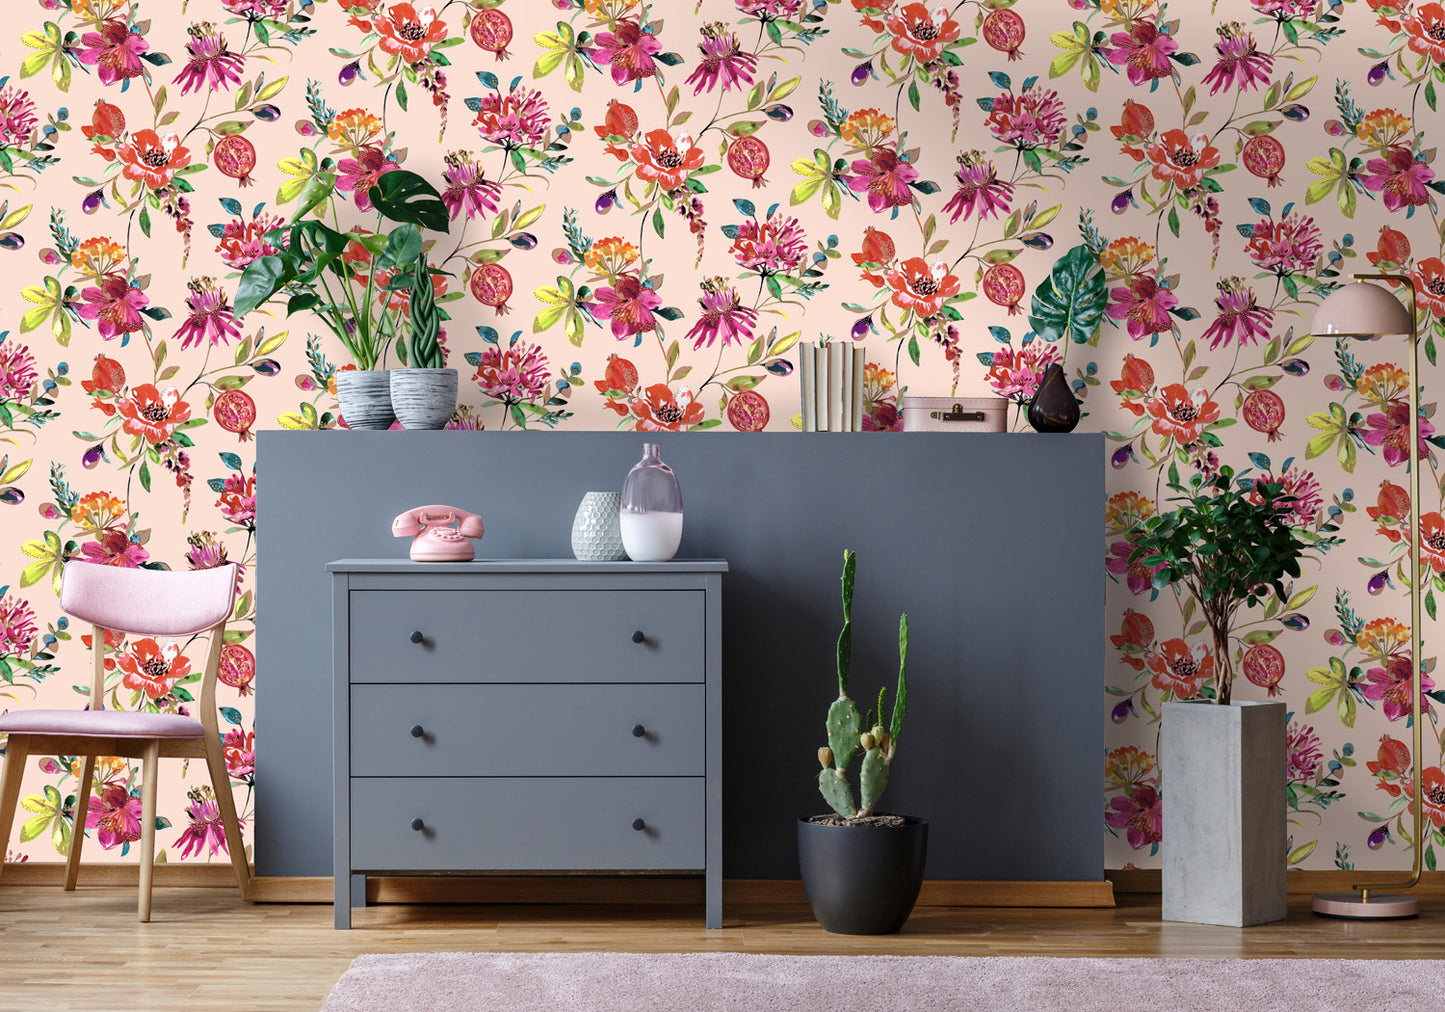 Floral Wallpaper - Punica - Flowers & fruits in light pink